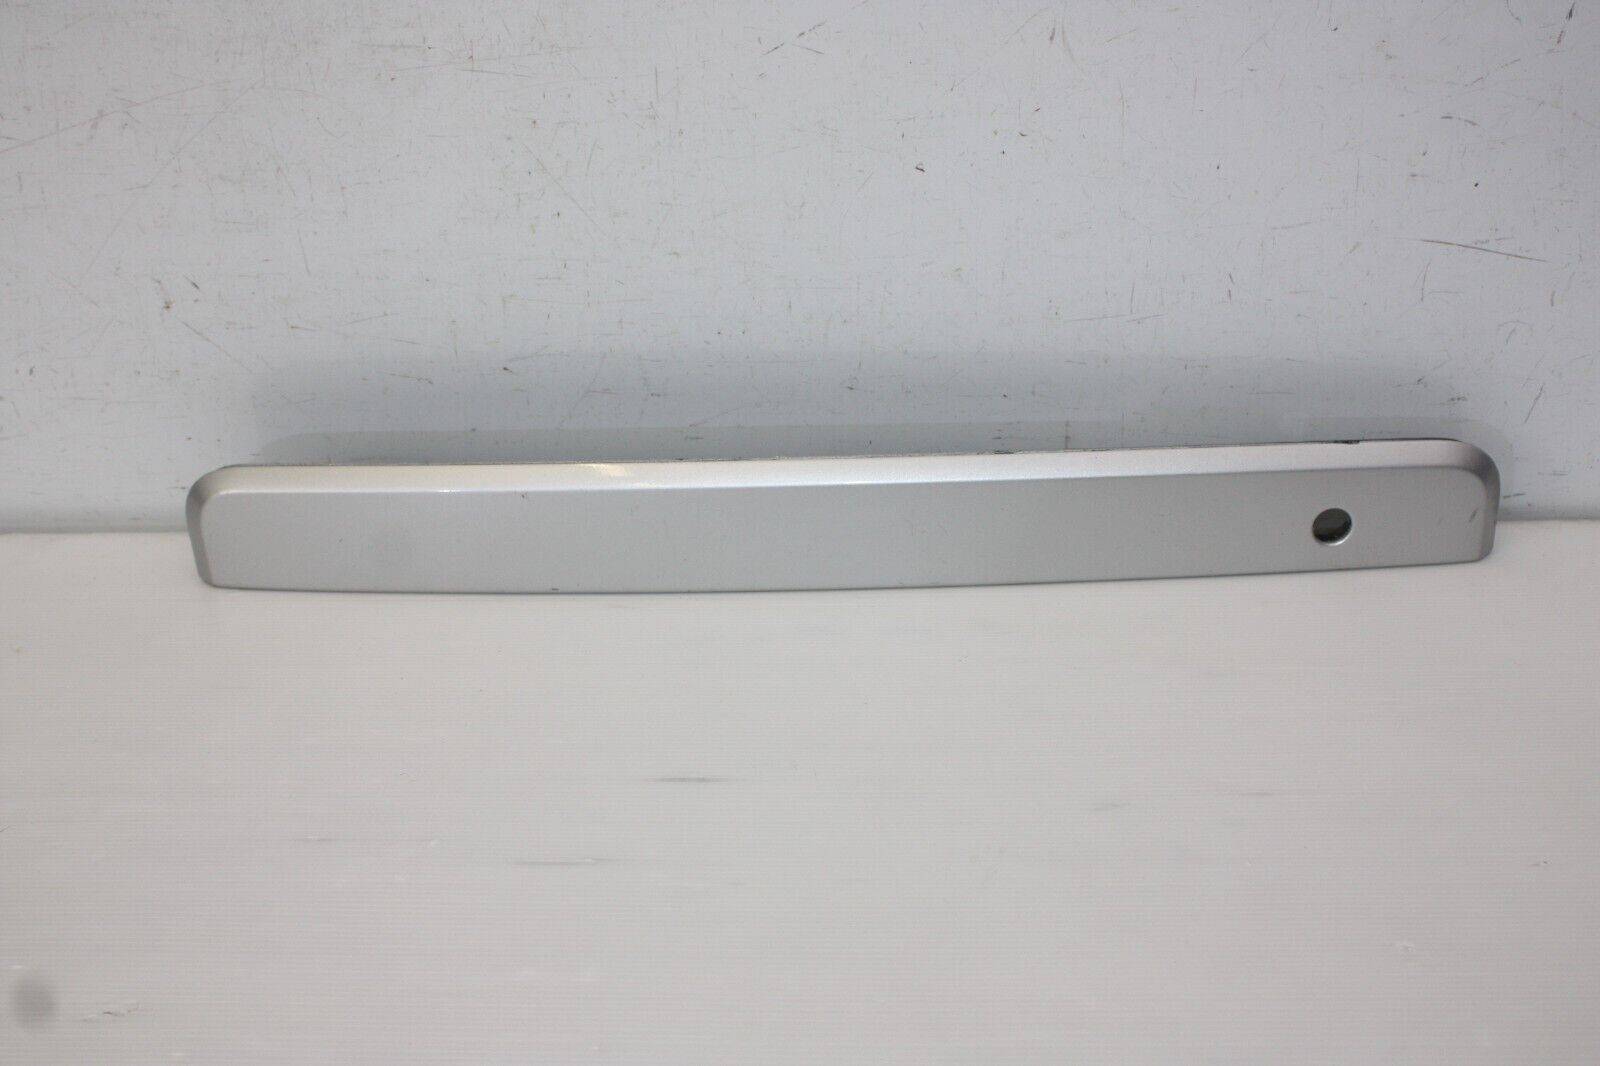 VW Transporter Rear Trunk Boot Lid Handle 2015 TO 2020 7E0827574H Genuine 175613135805